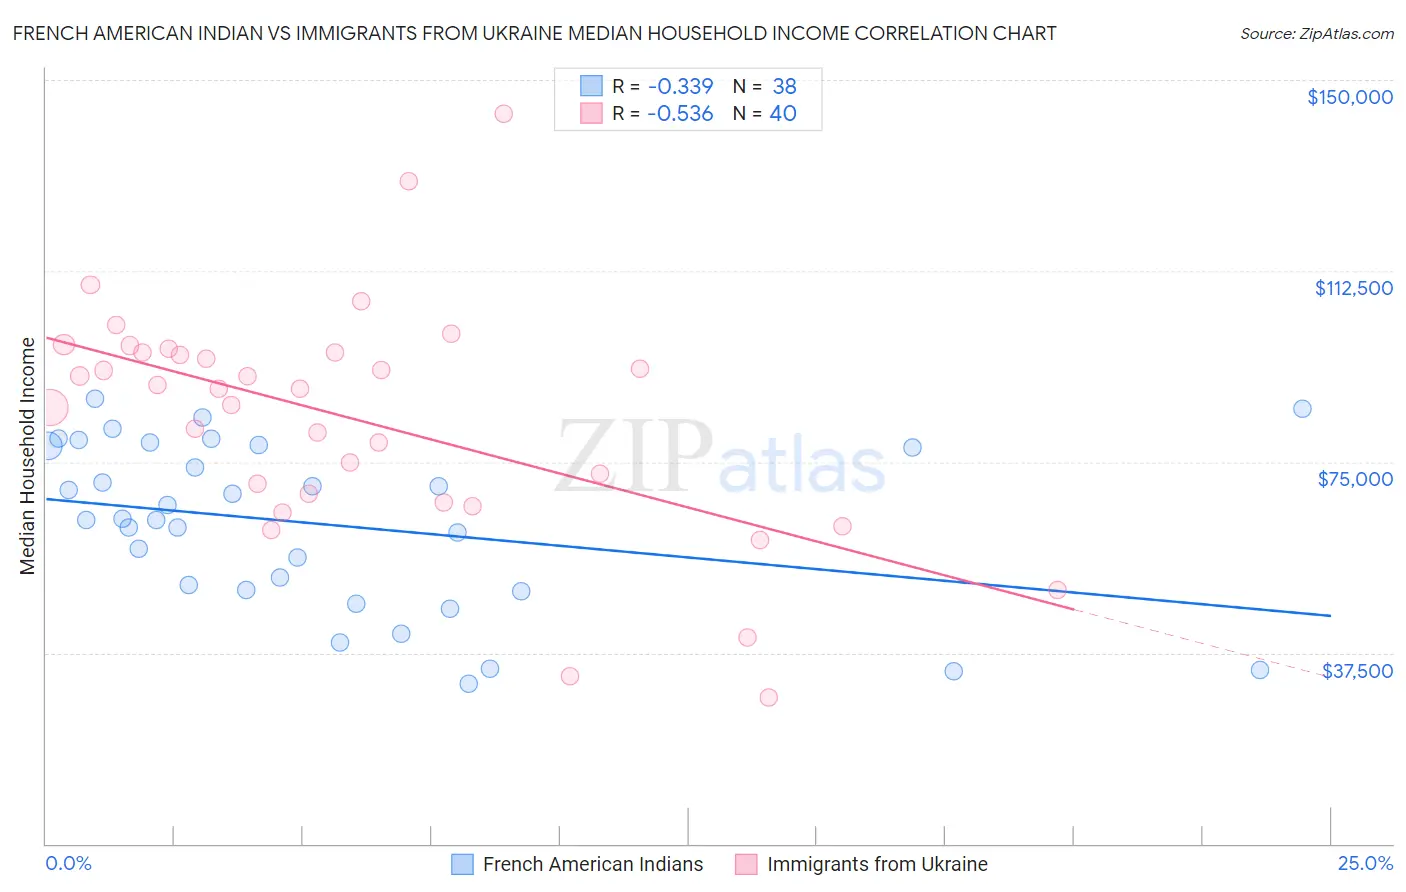 French American Indian vs Immigrants from Ukraine Median Household Income